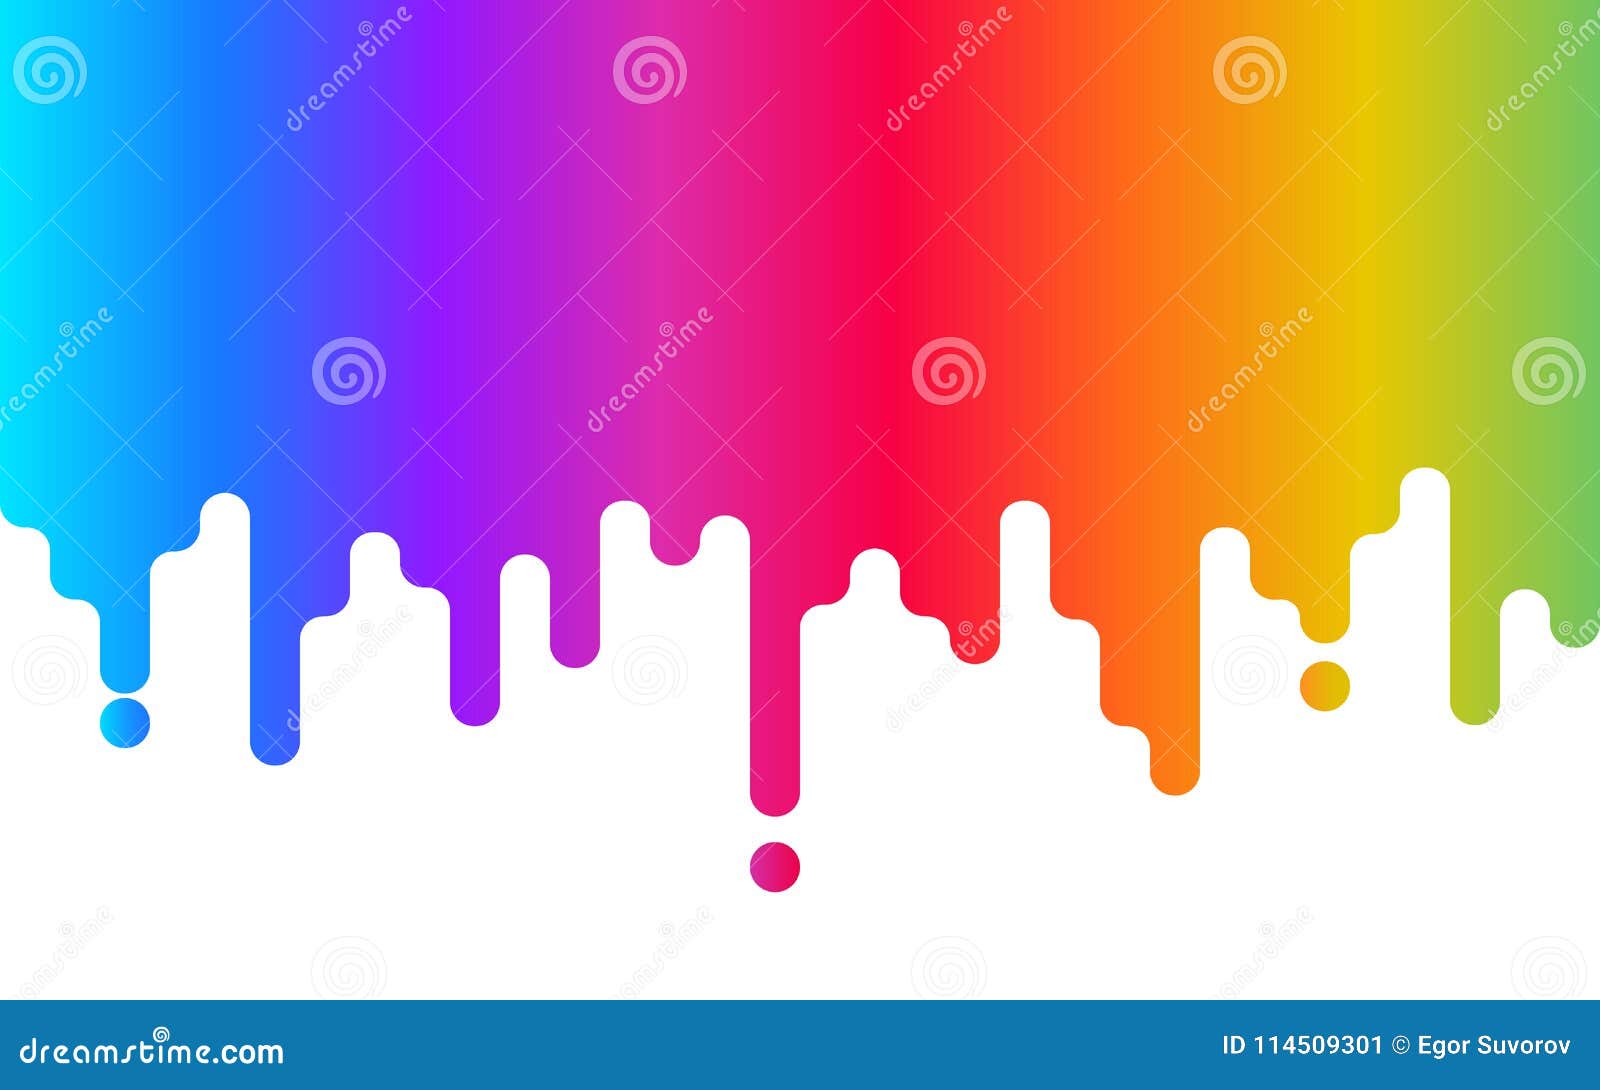 Paint dripping on transparent background cream Vector Image